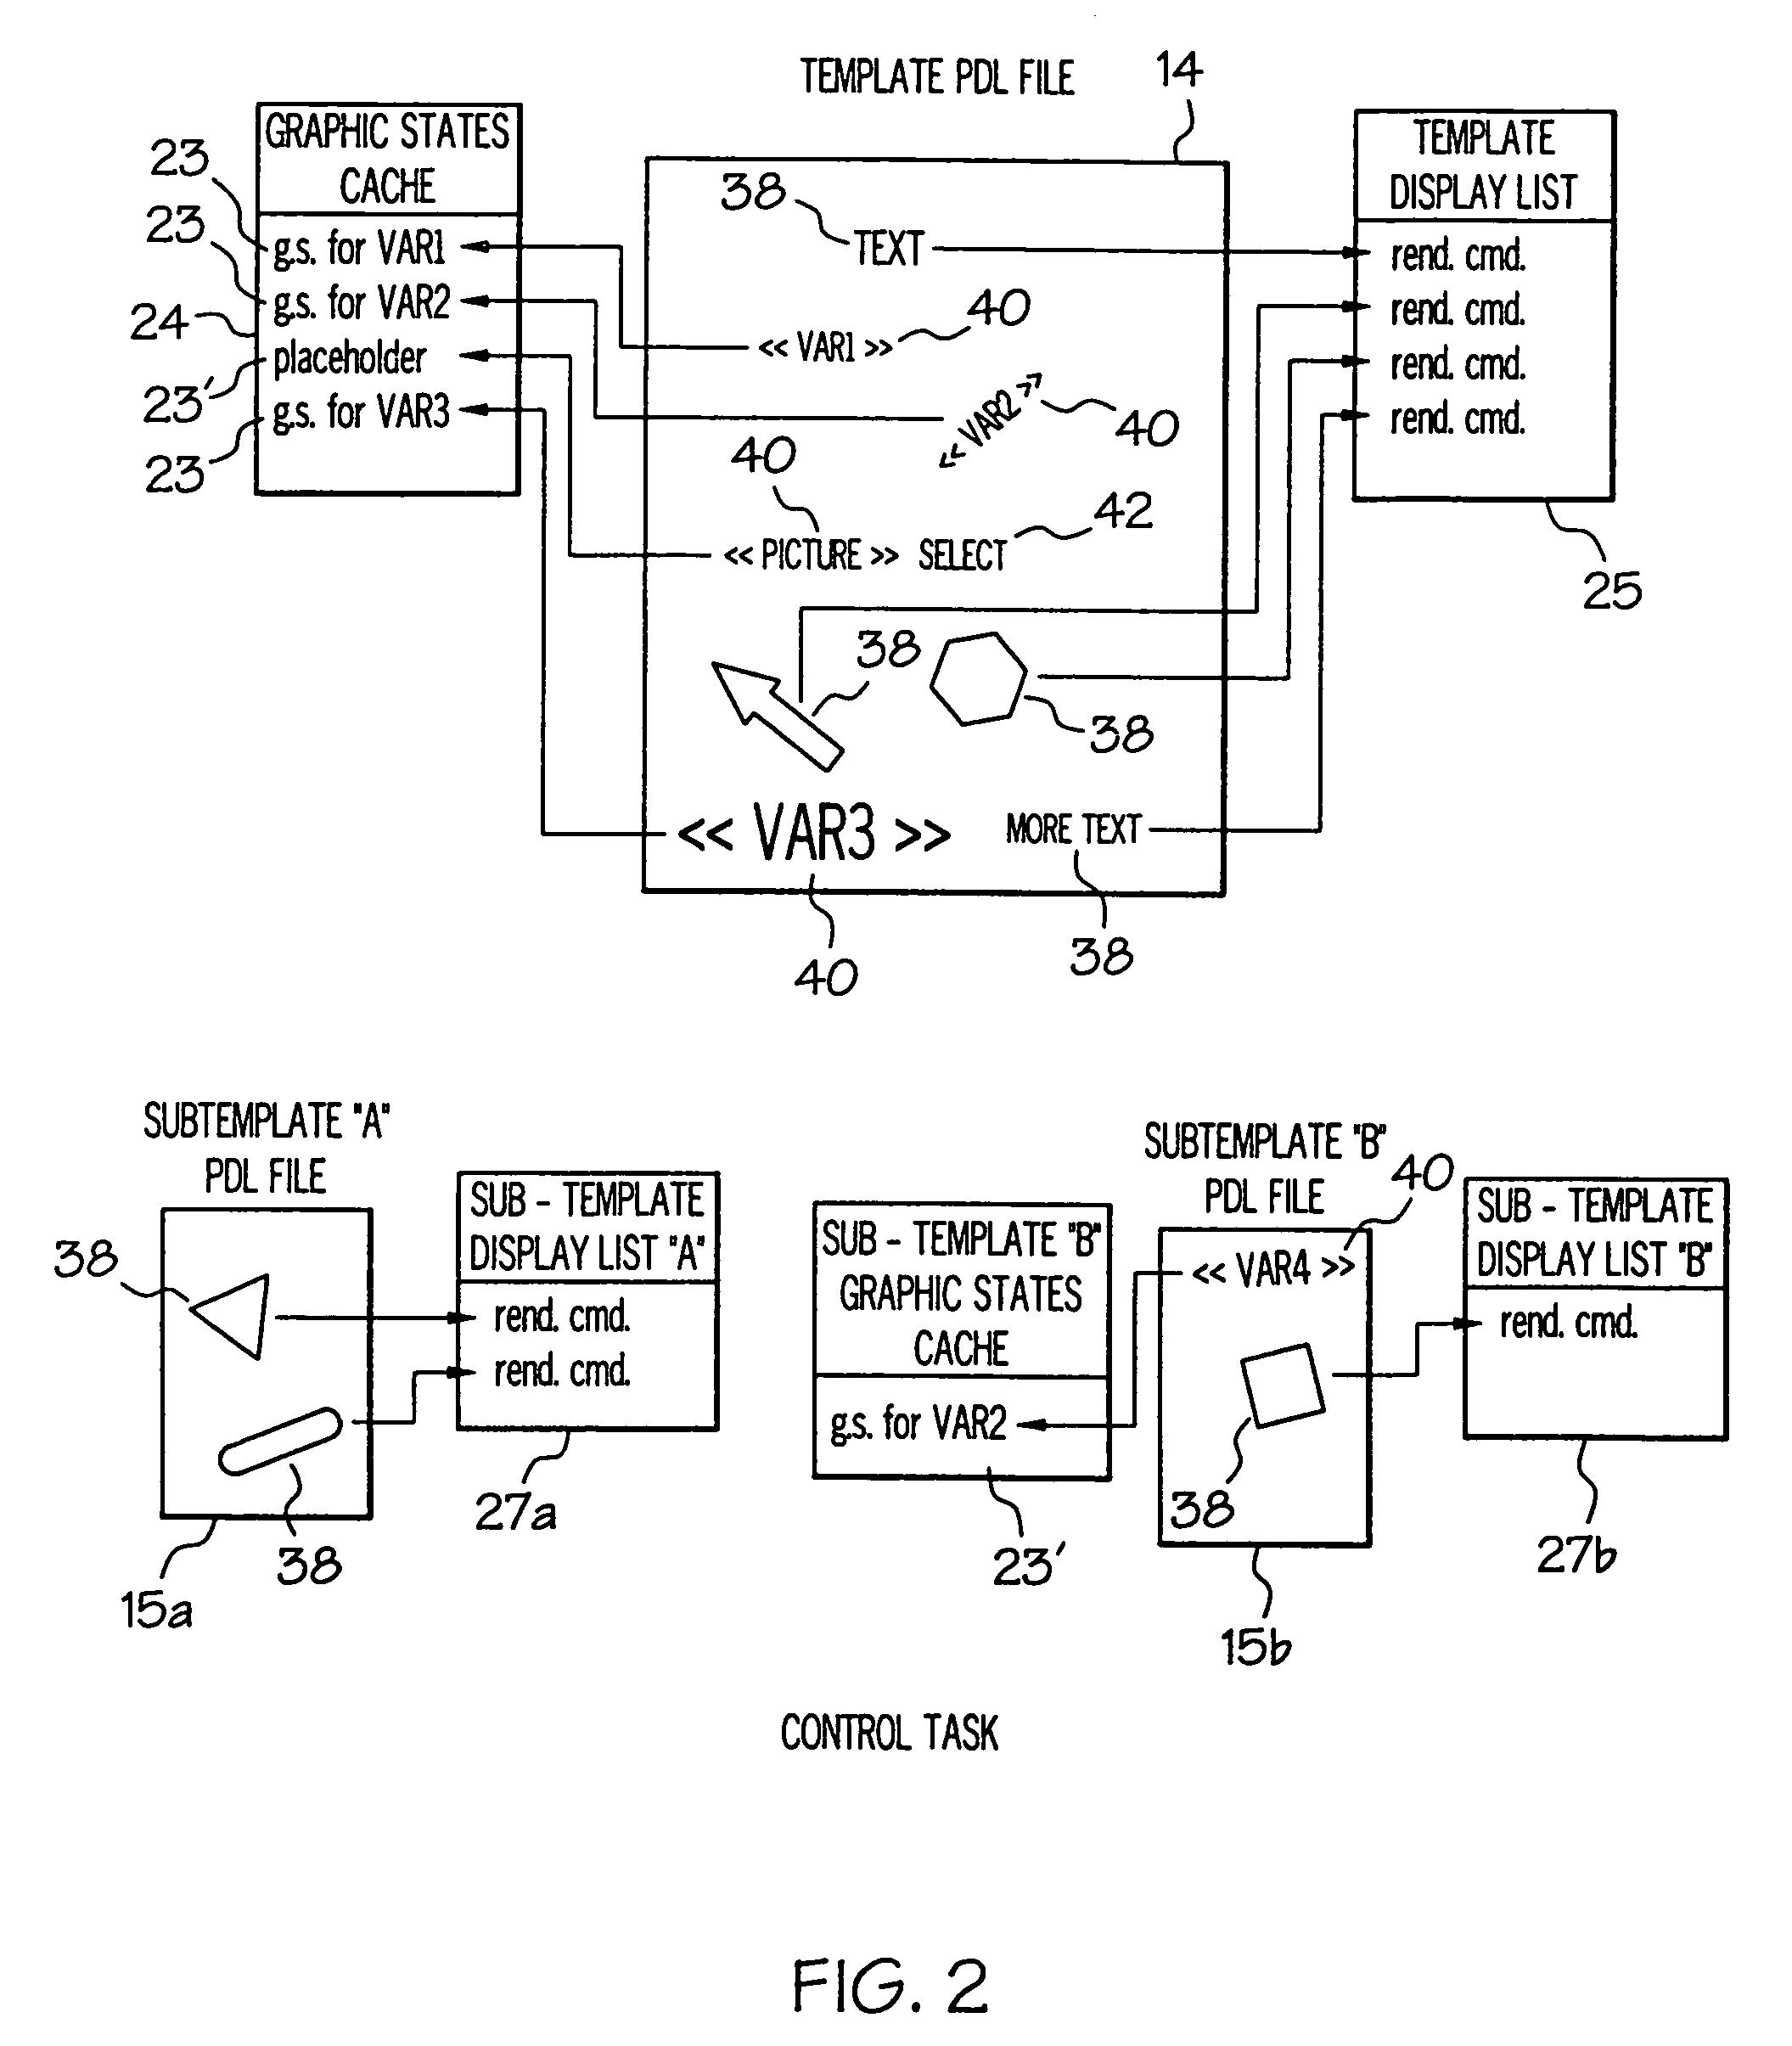 Method and system for merging variable text and images into bitmaps defined by a page description language